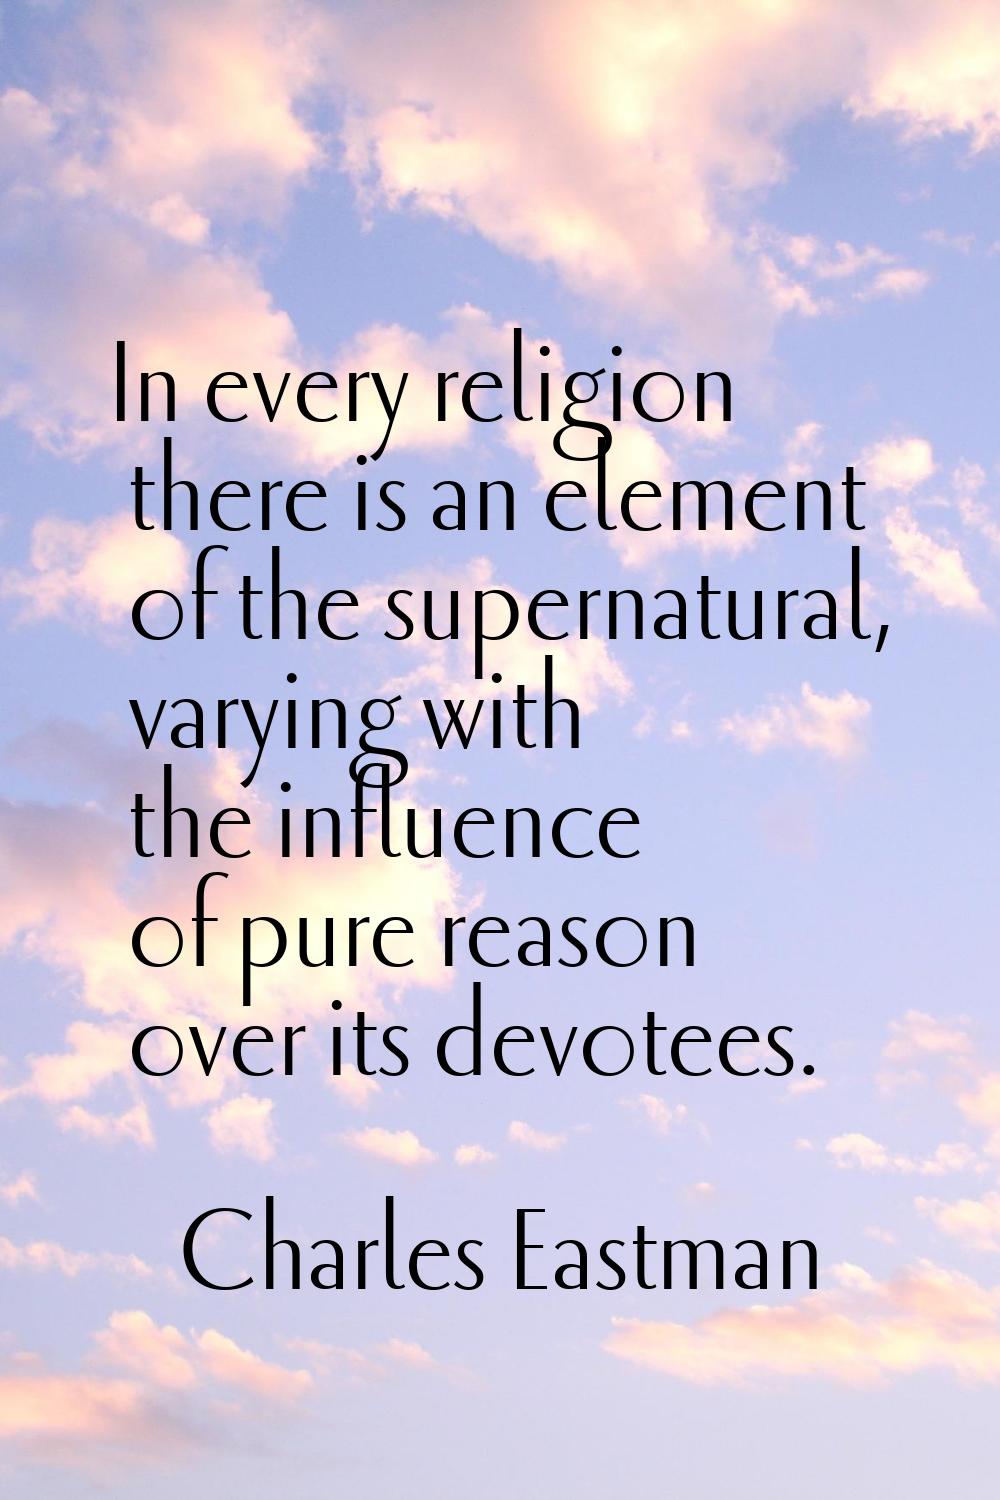 In every religion there is an element of the supernatural, varying with the influence of pure reaso